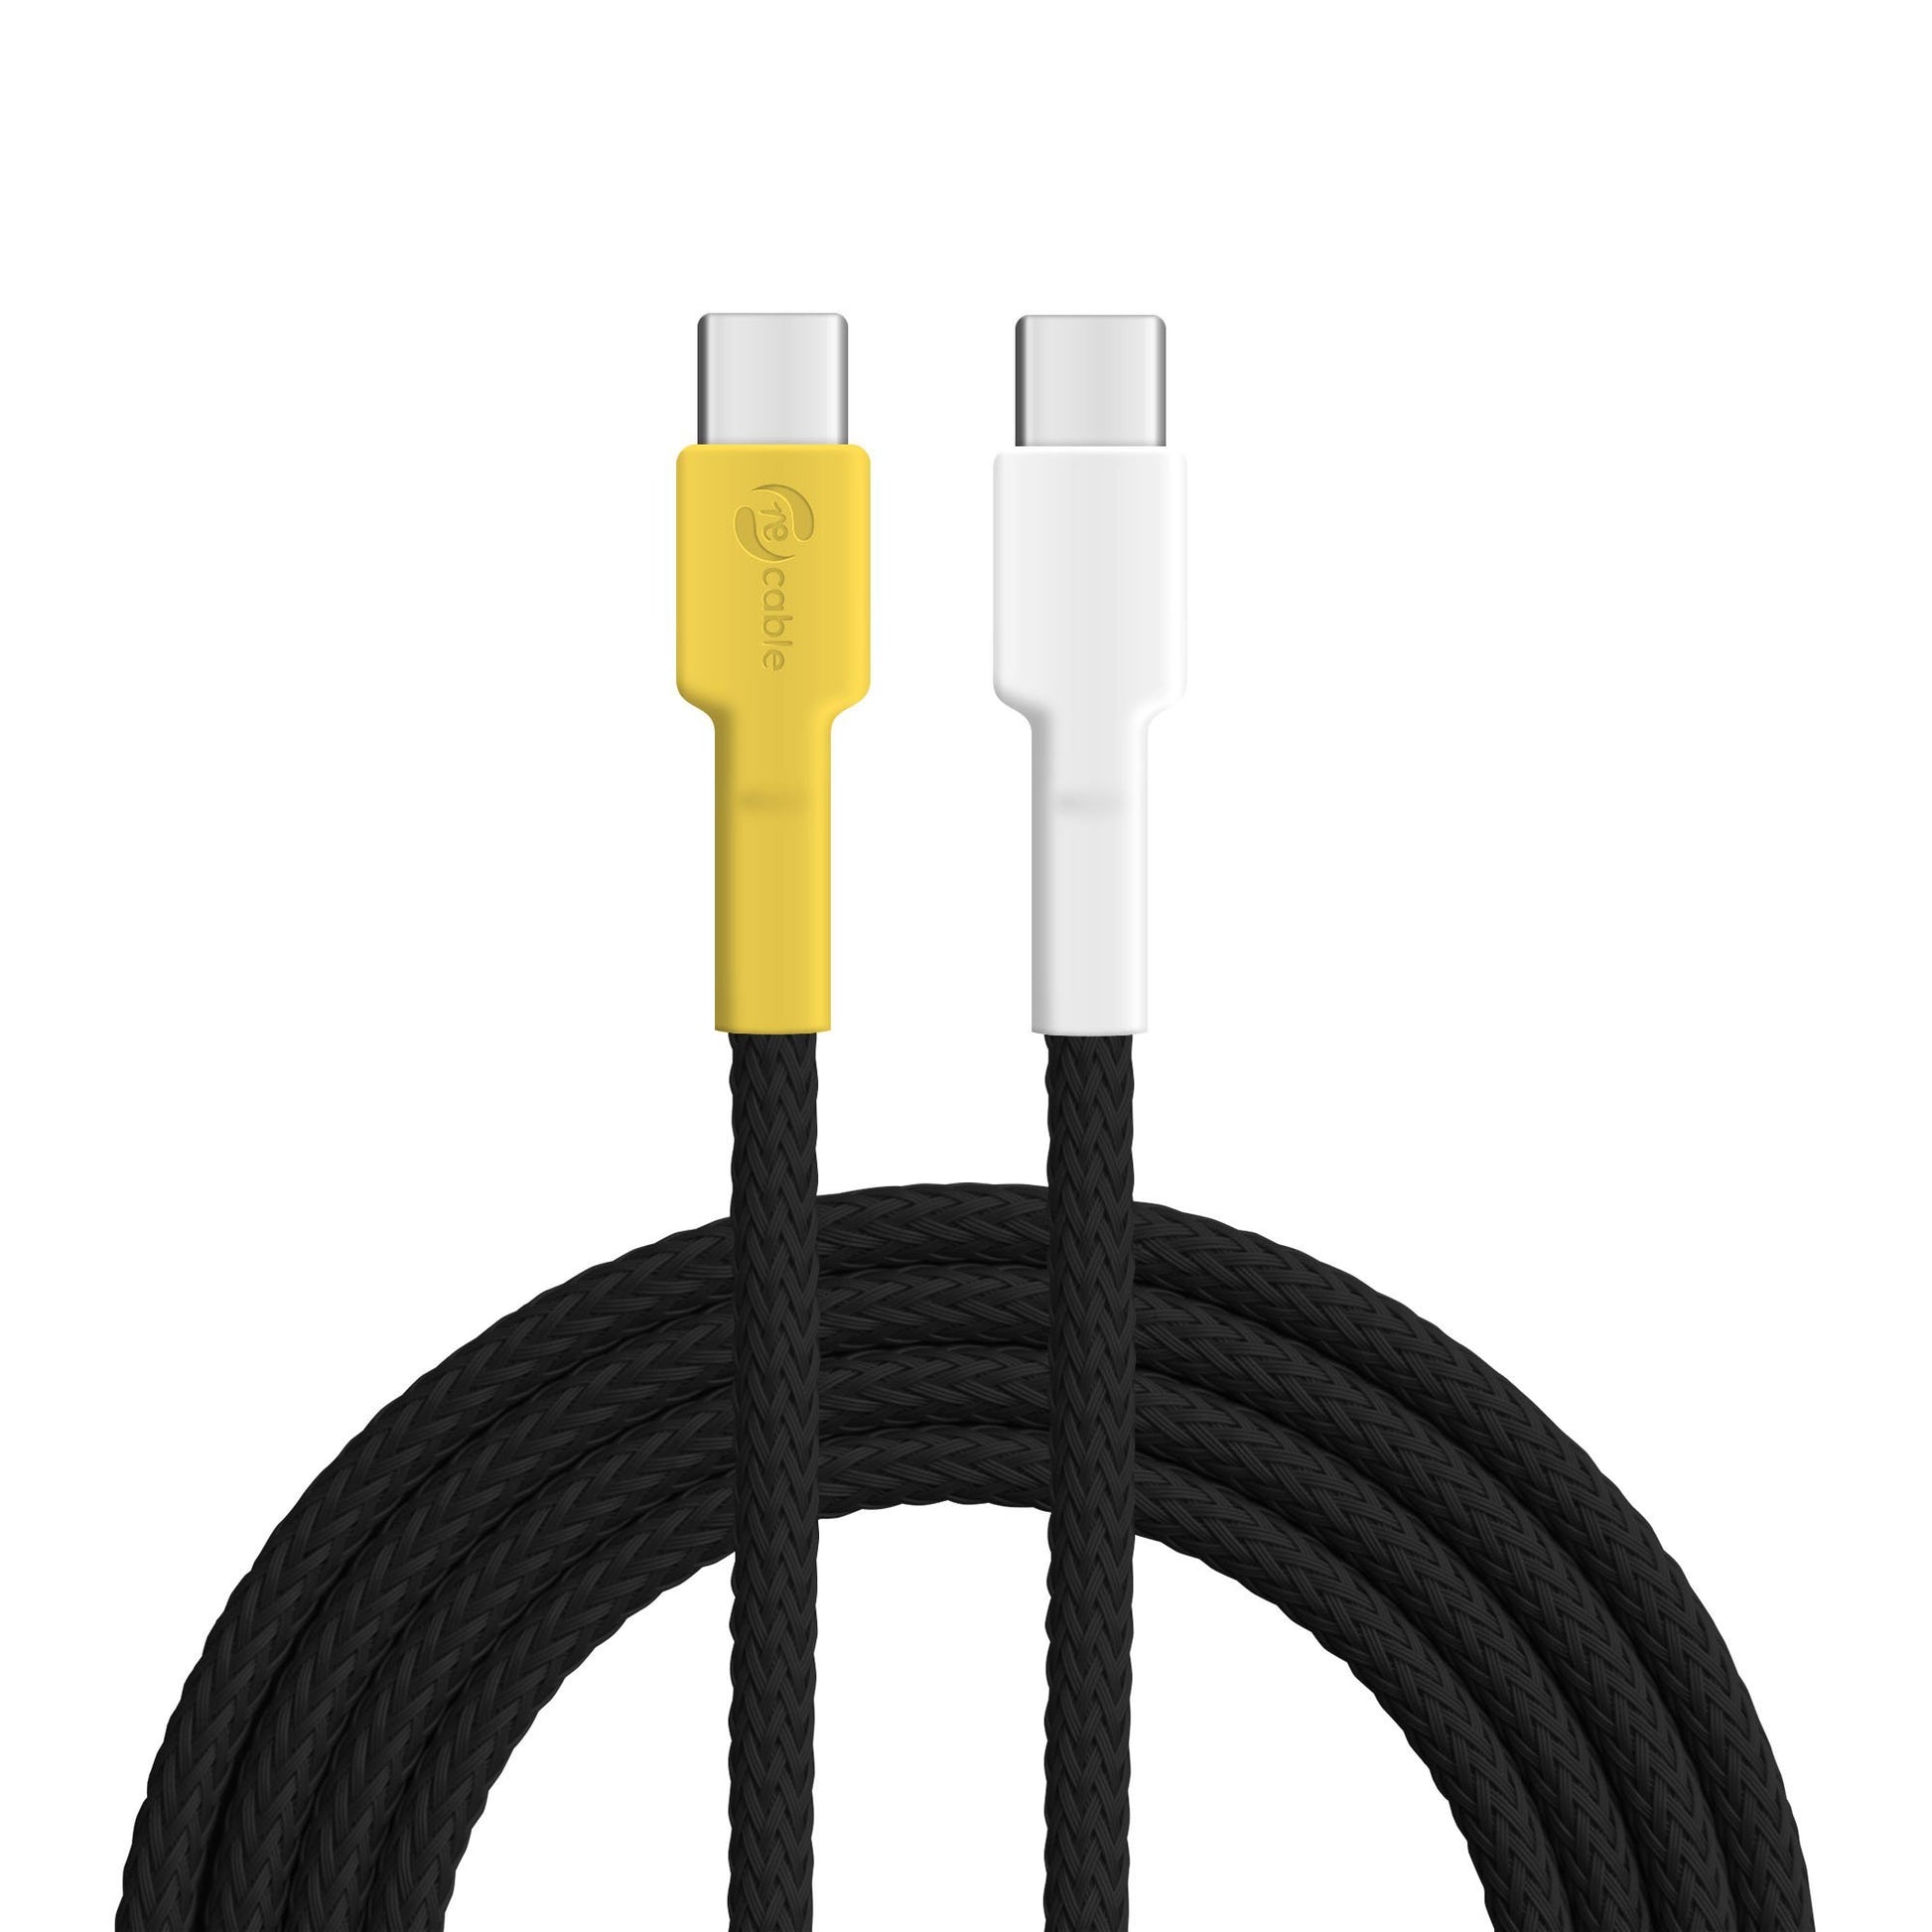 USB cable, Design: Yellow-rumped flycatcher, Connections: USB C on USB C